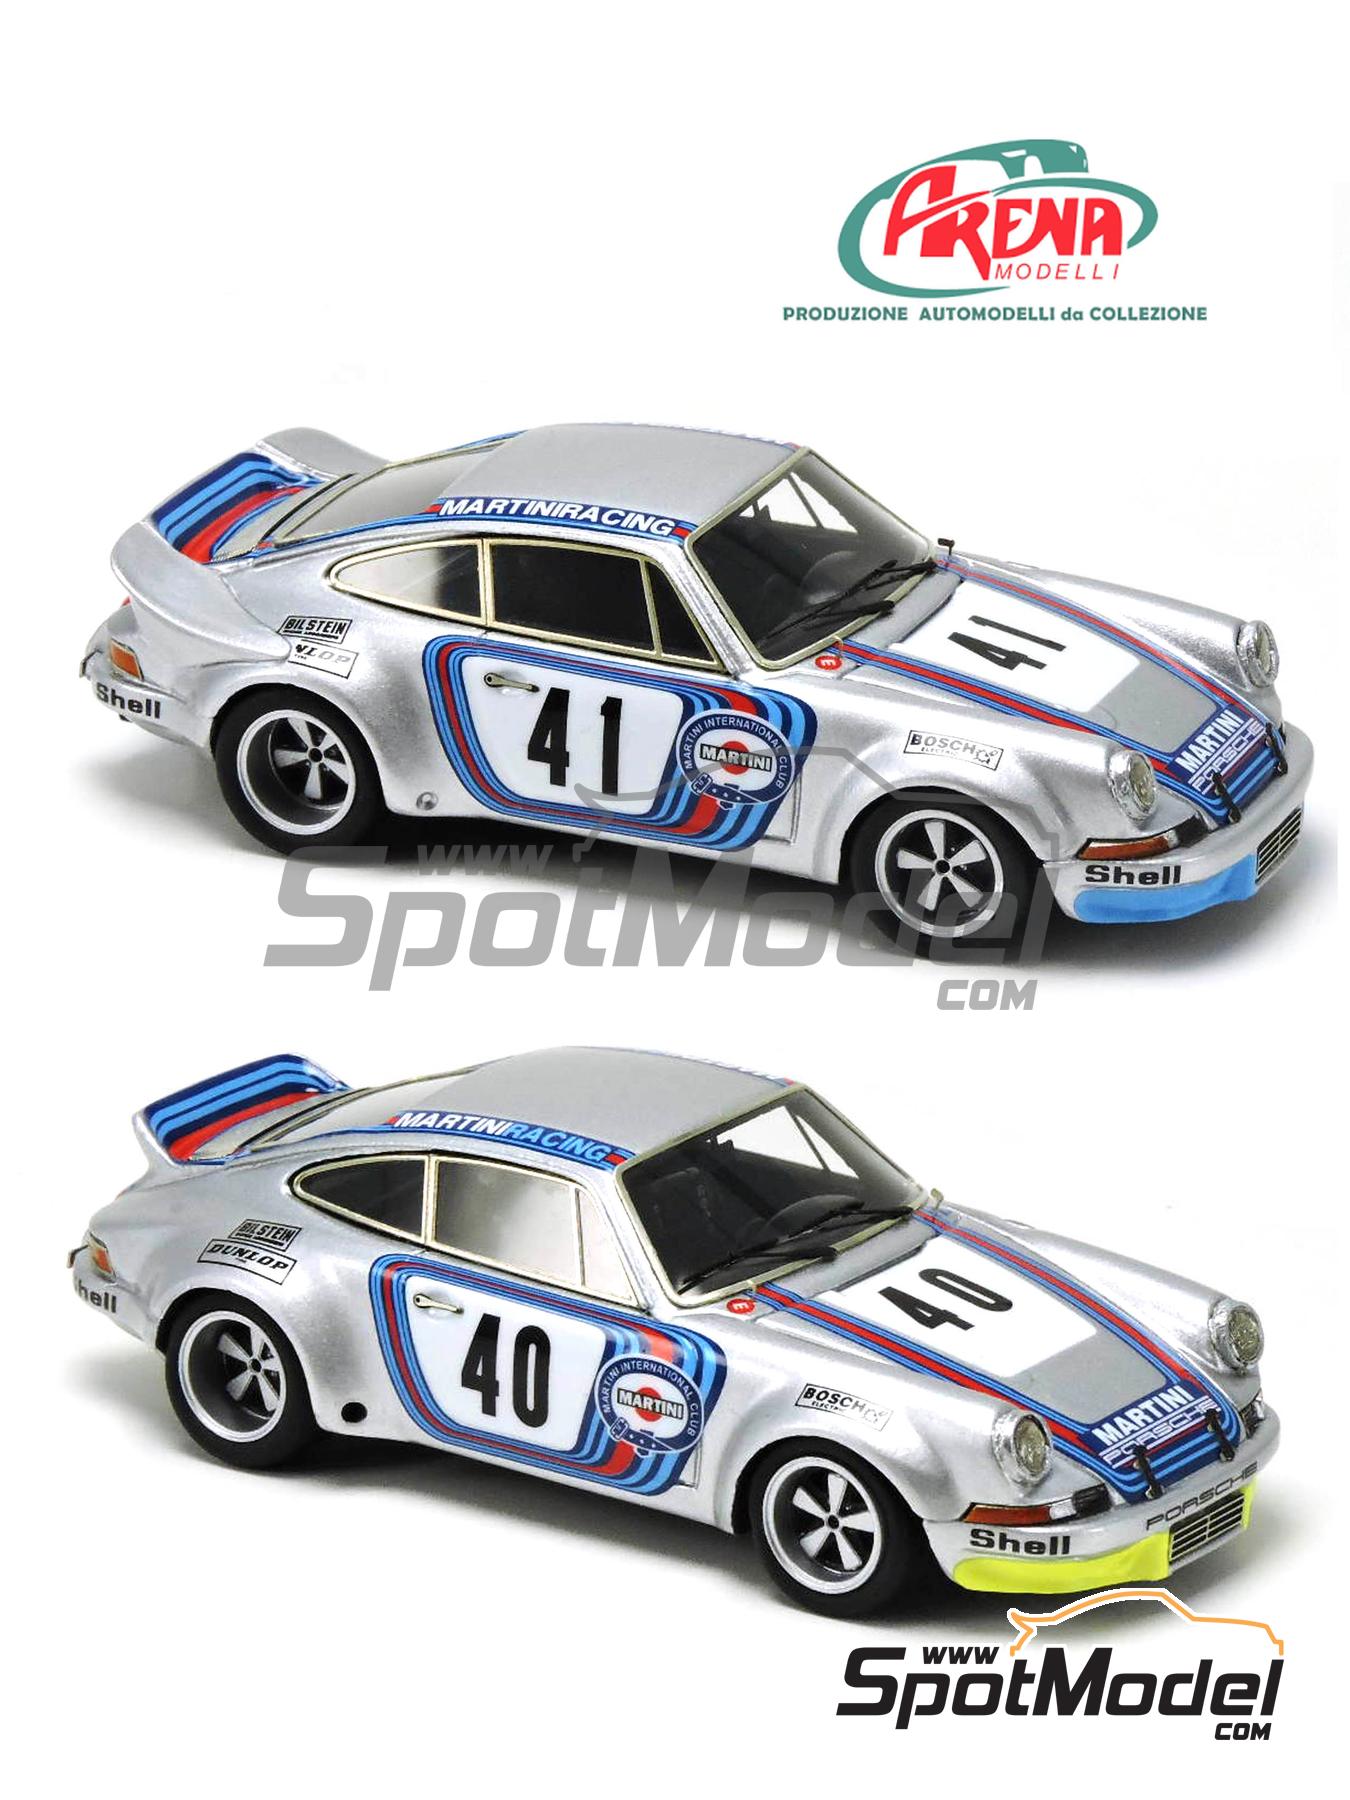 Porsche 911 Carrera RSR Martini International Racing Team - SPA  Francorchamps 1000 Kms 1973. Car scale model kit in 1/43 scale manufactured  by Arena M